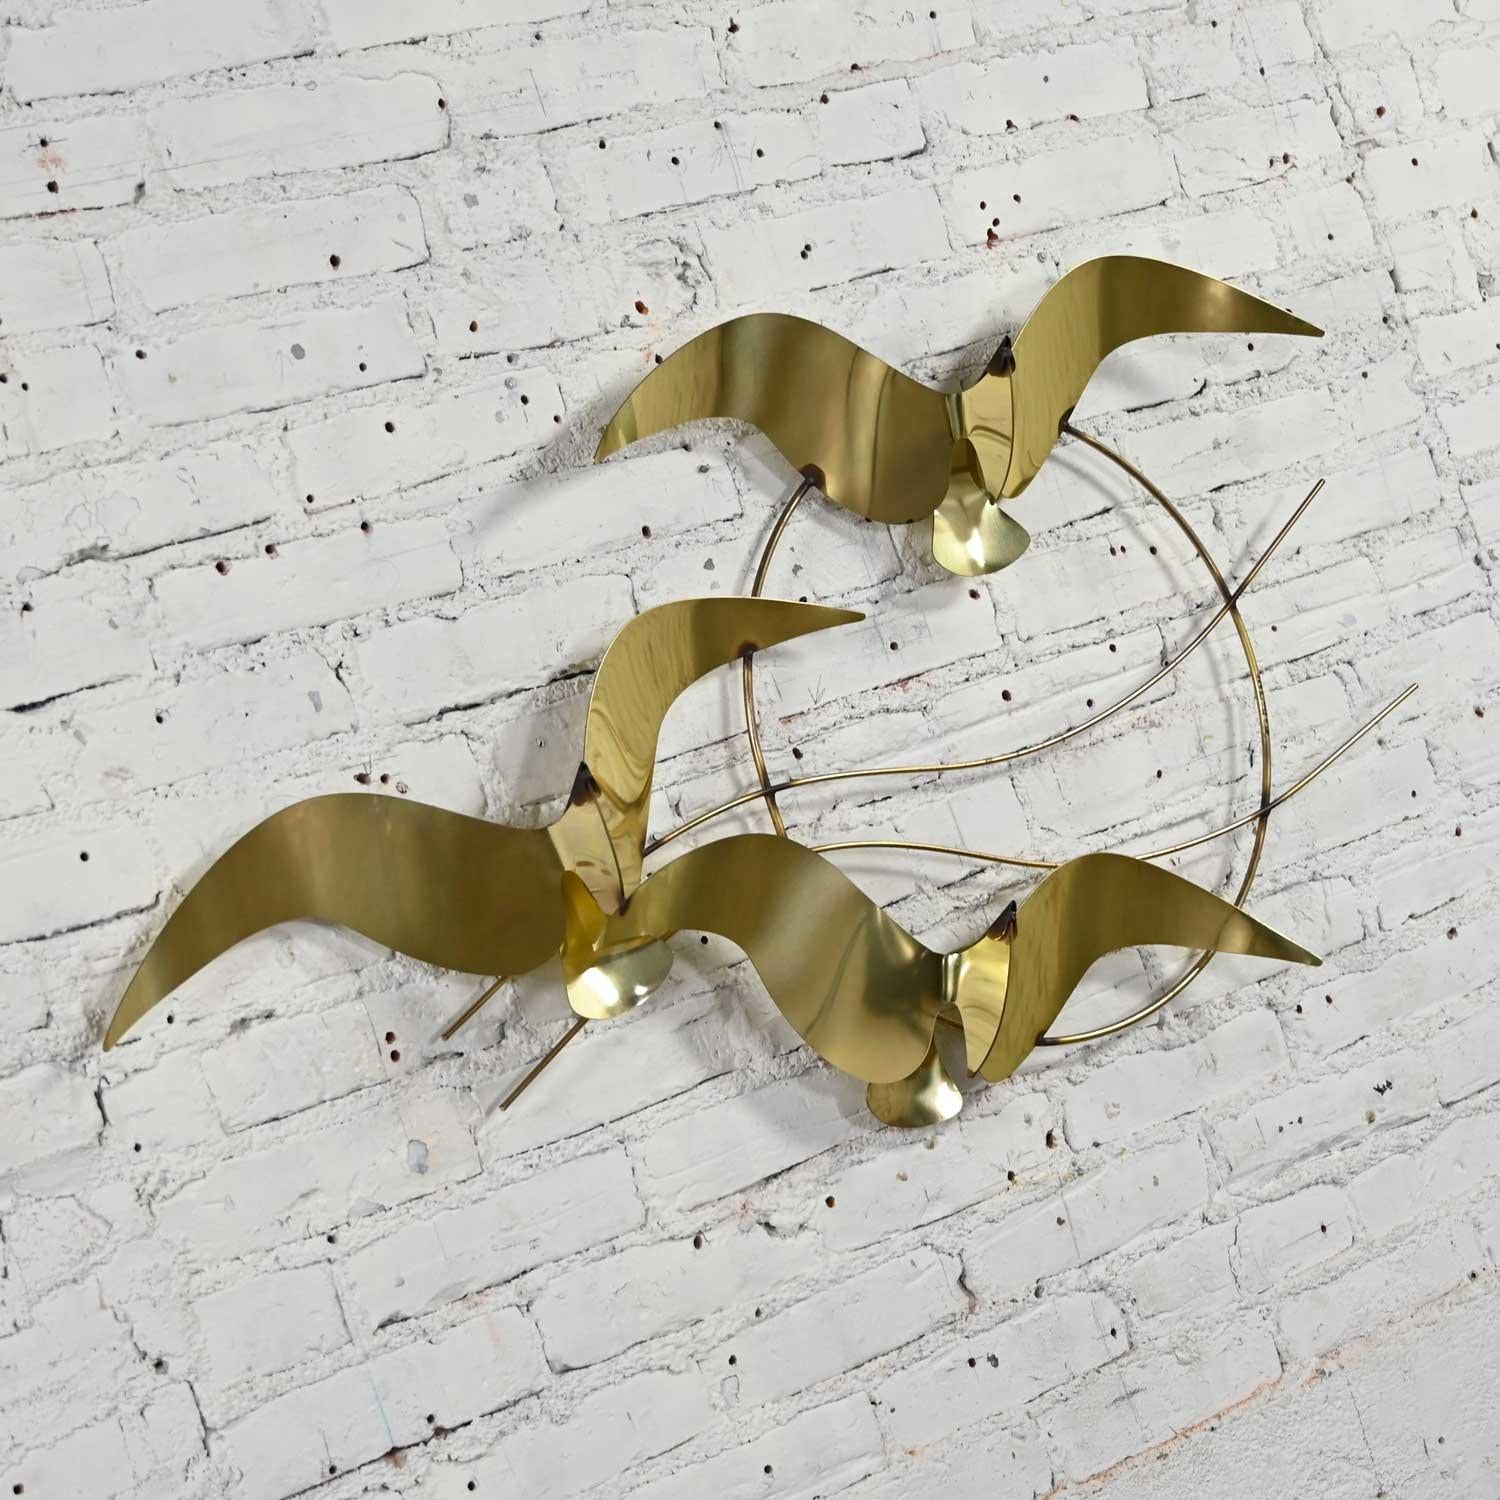 Fabulous brass plated bird or flock of seagull’s wall sculpture signed C. Jere, 1985. Beautiful condition, keeping in mind that this is vintage and not new so will have signs of use and wear. There are two places on the horizontal wires that have